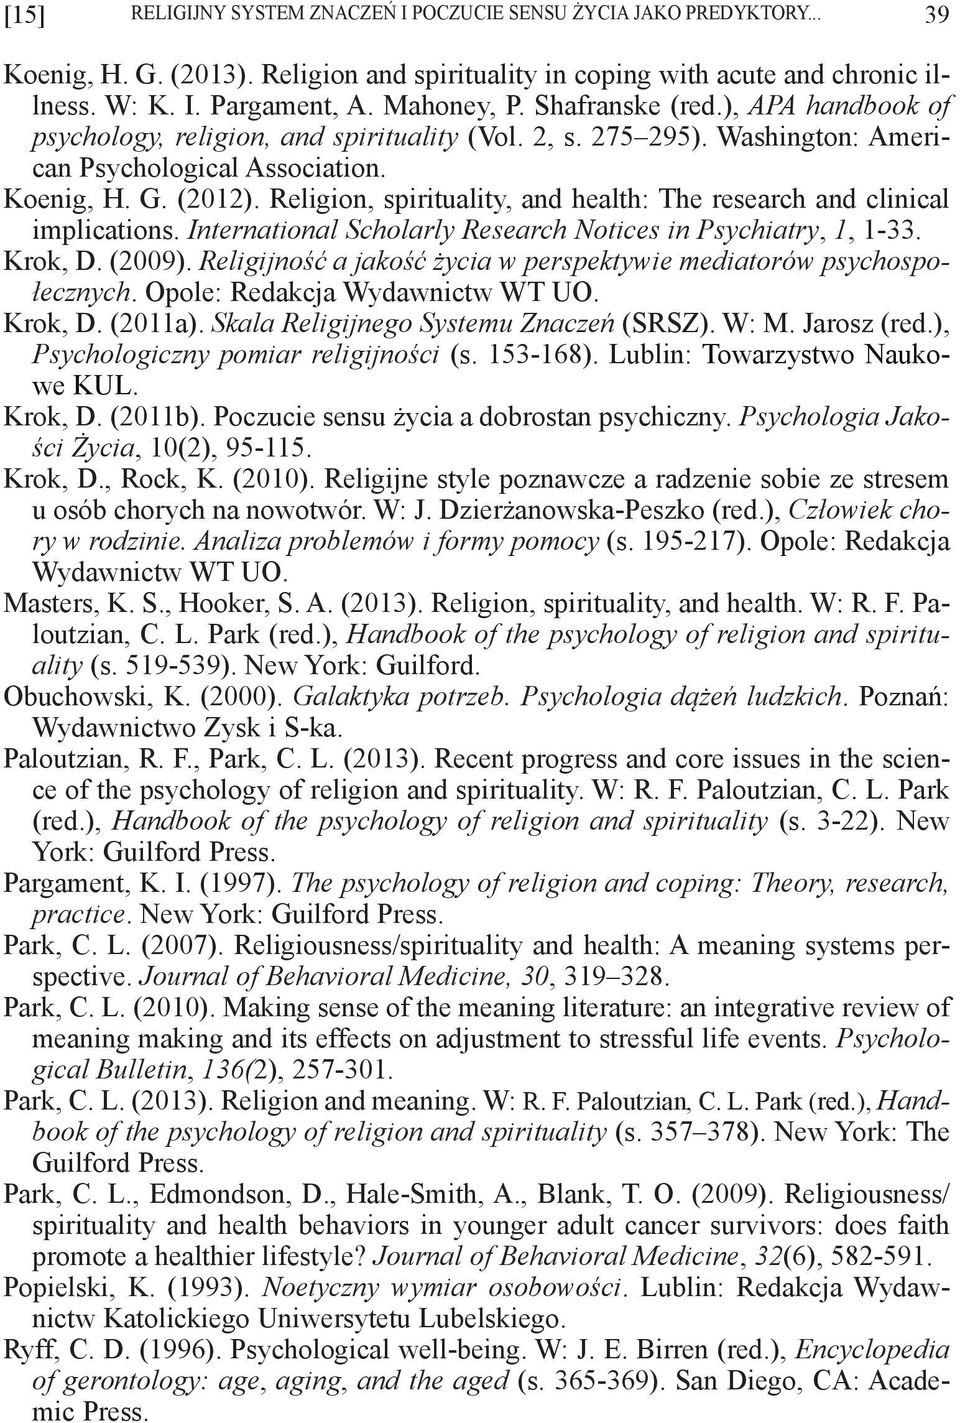 Religion, spirituality, and health: The research and clinical implications. International Scholarly Research Notices in Psychiatry, 1, 1-33. Krok, D. (2009).